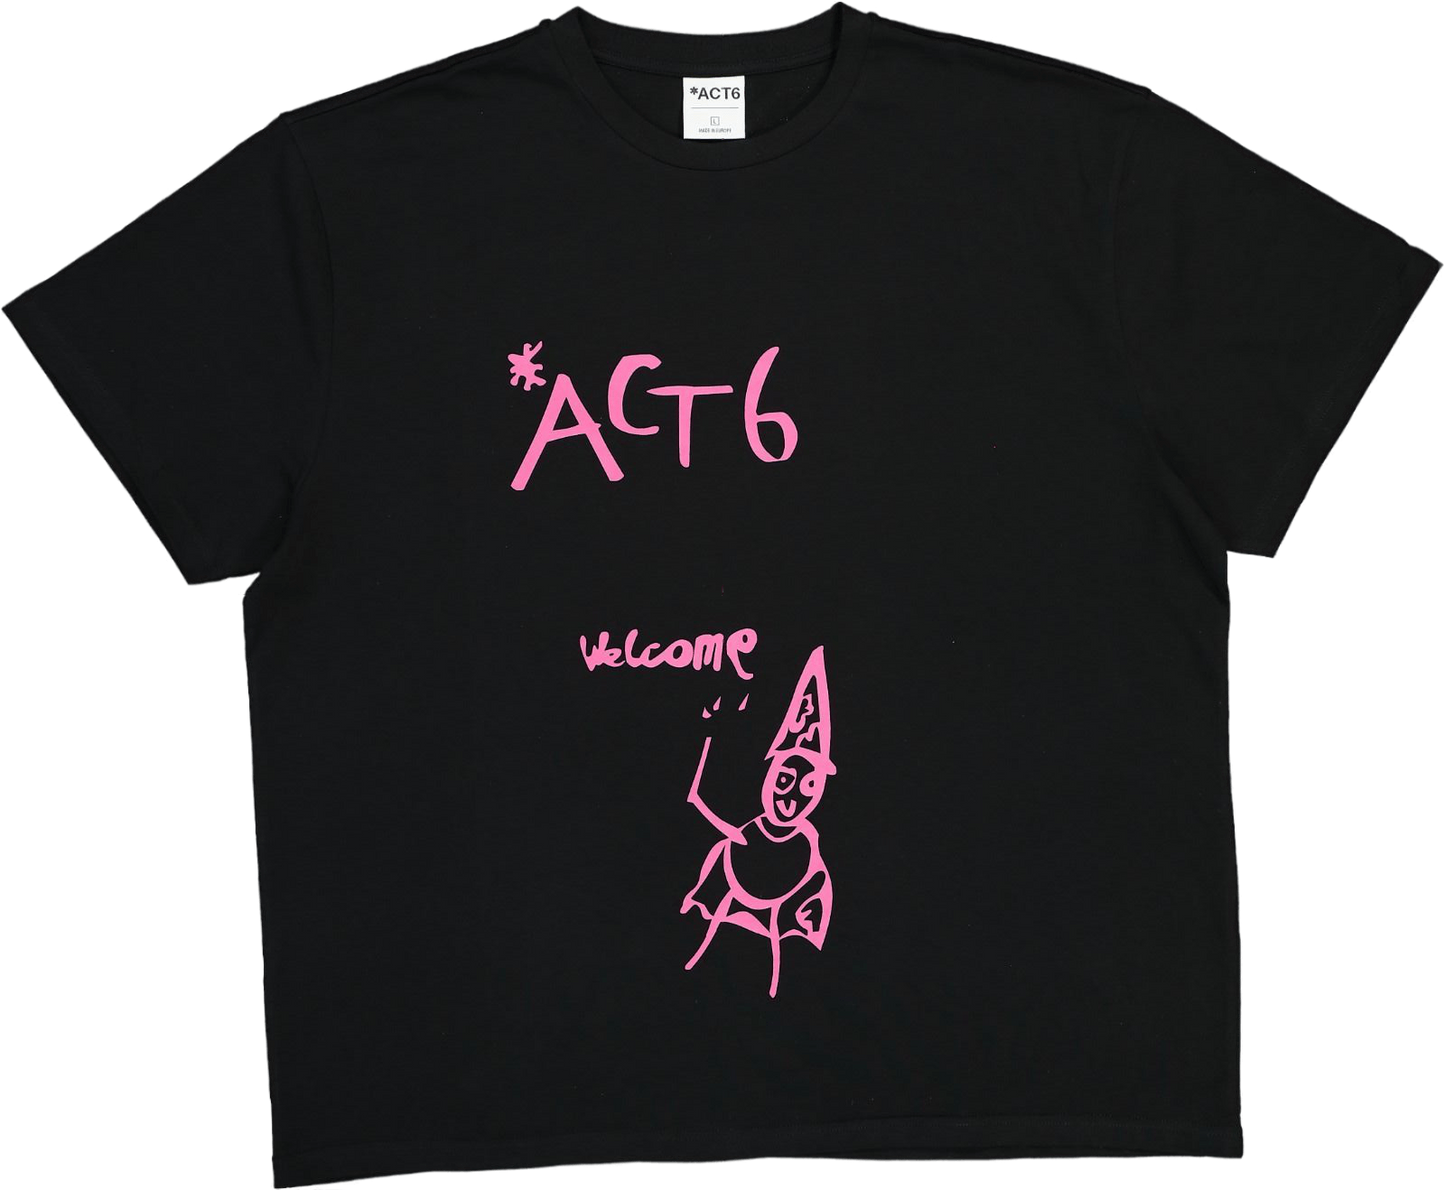 ACT6 "Welcome" T-Shirt